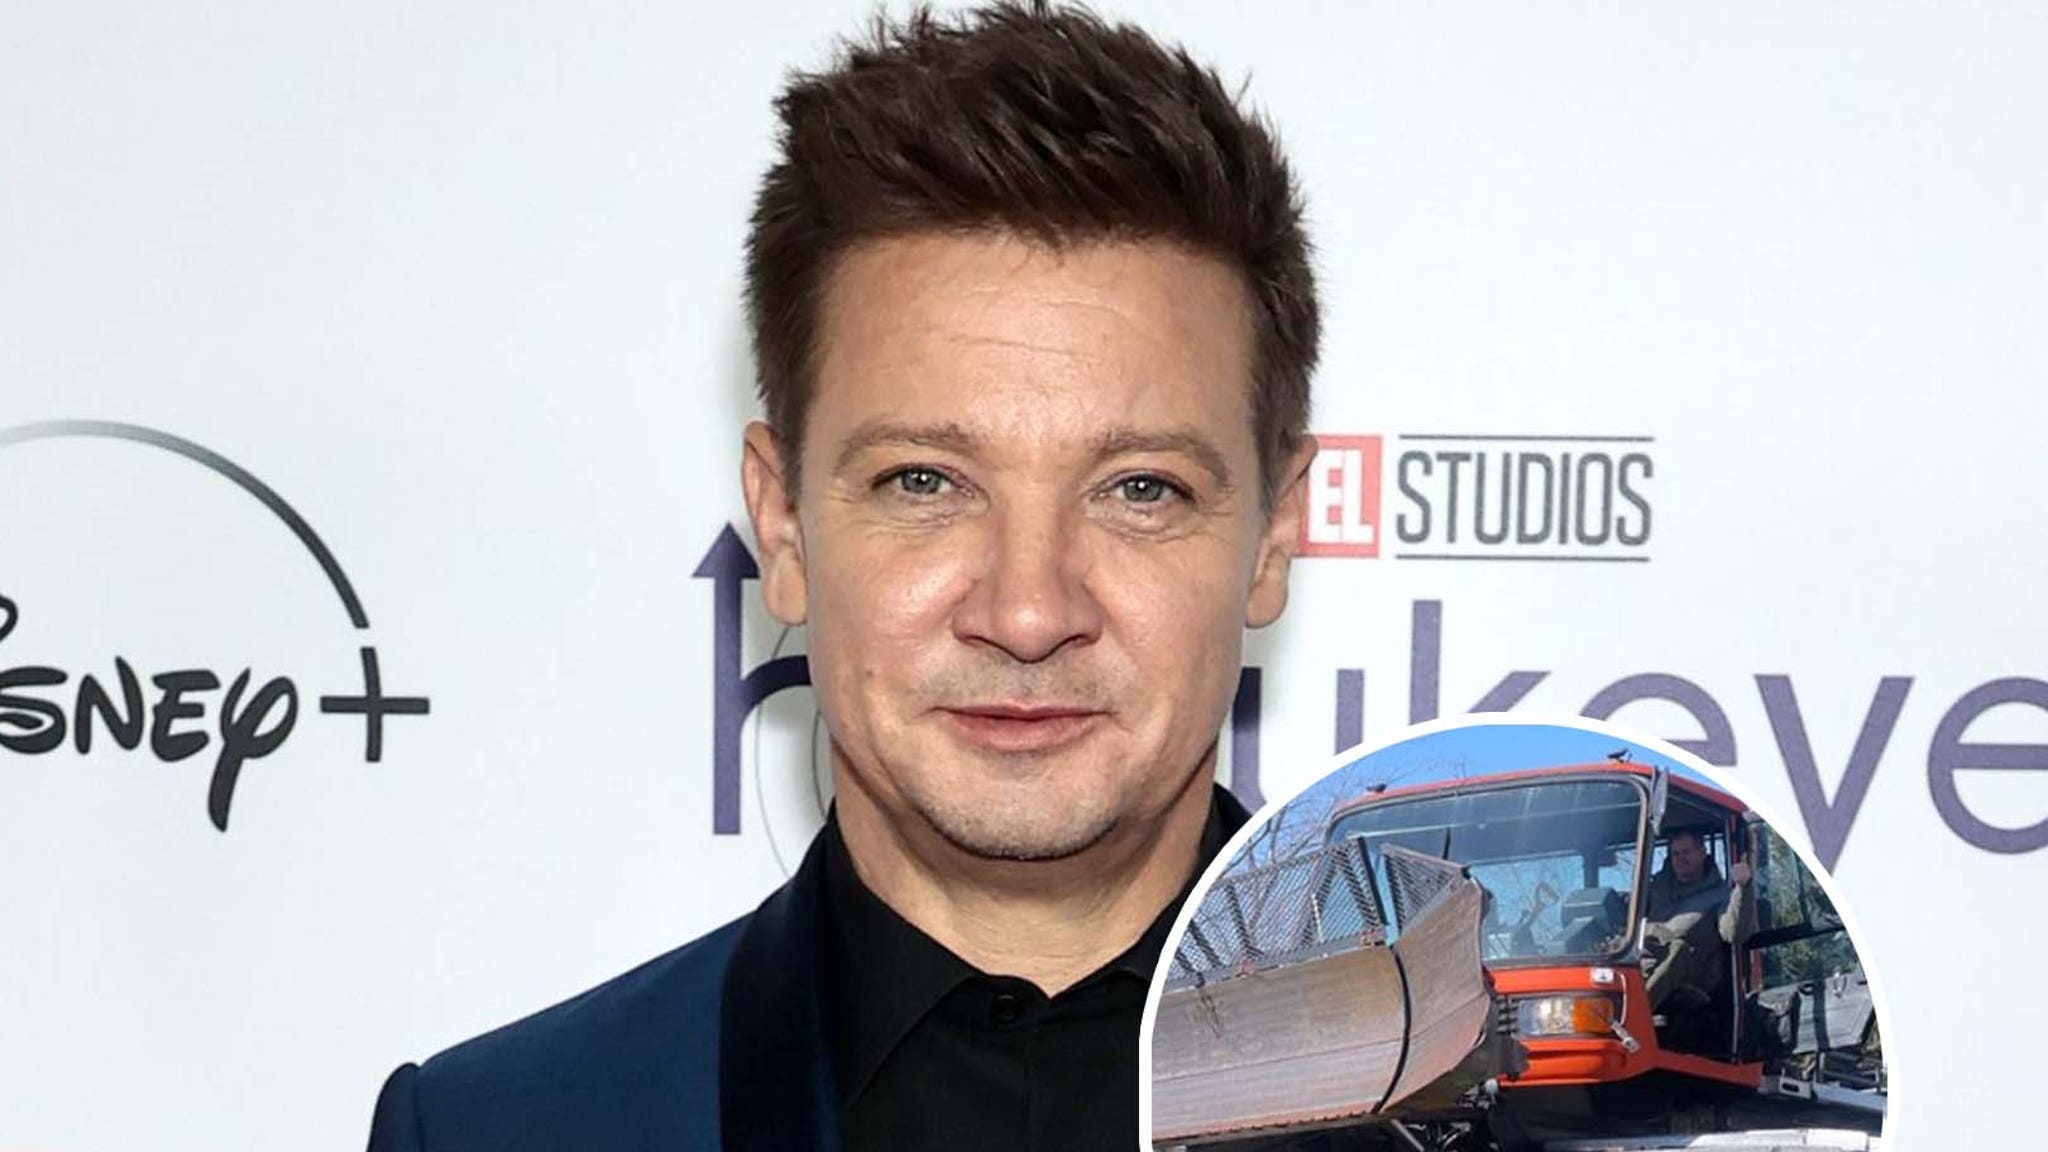 Jeremy Renner 'Finally' Reunited With Snow Plow After January Accident